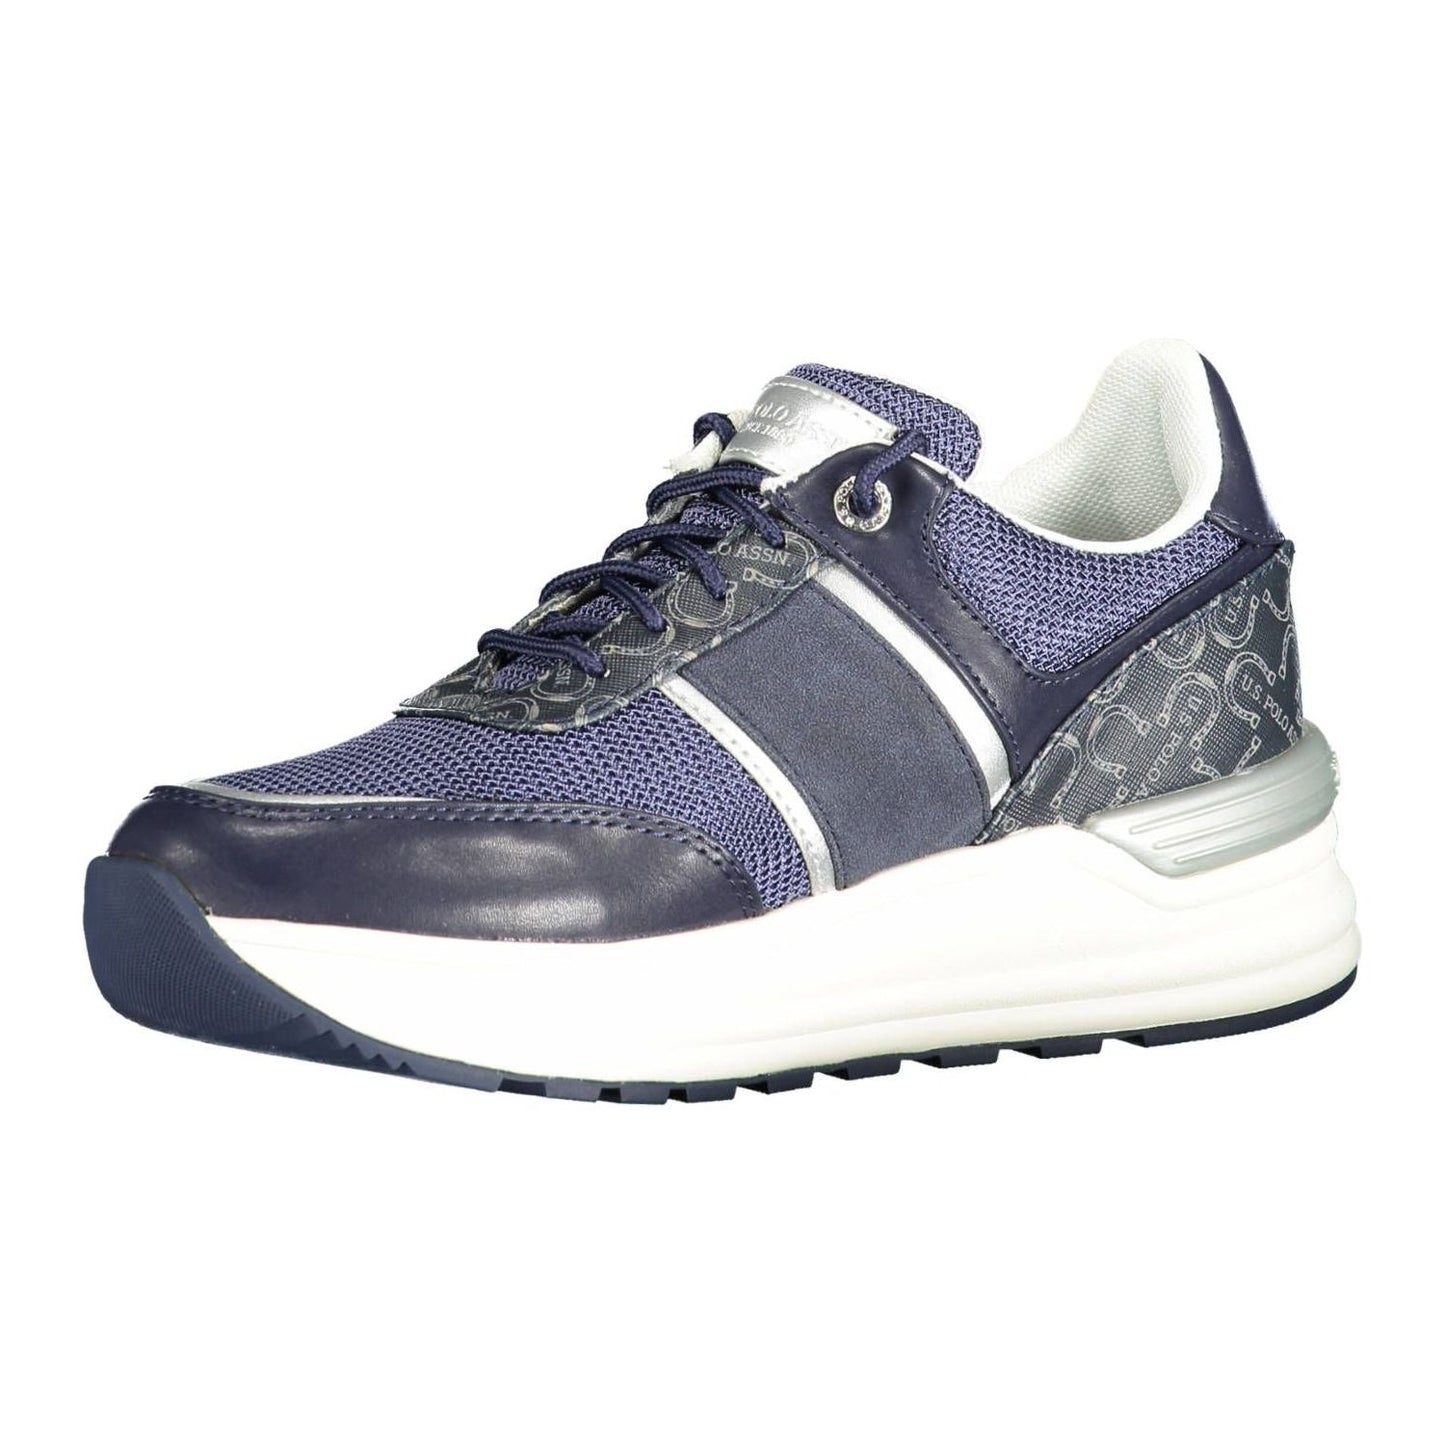 U.S. POLO ASSN. | Chic Blue Lace-Up Sport Sneakers| McRichard Designer Brands   